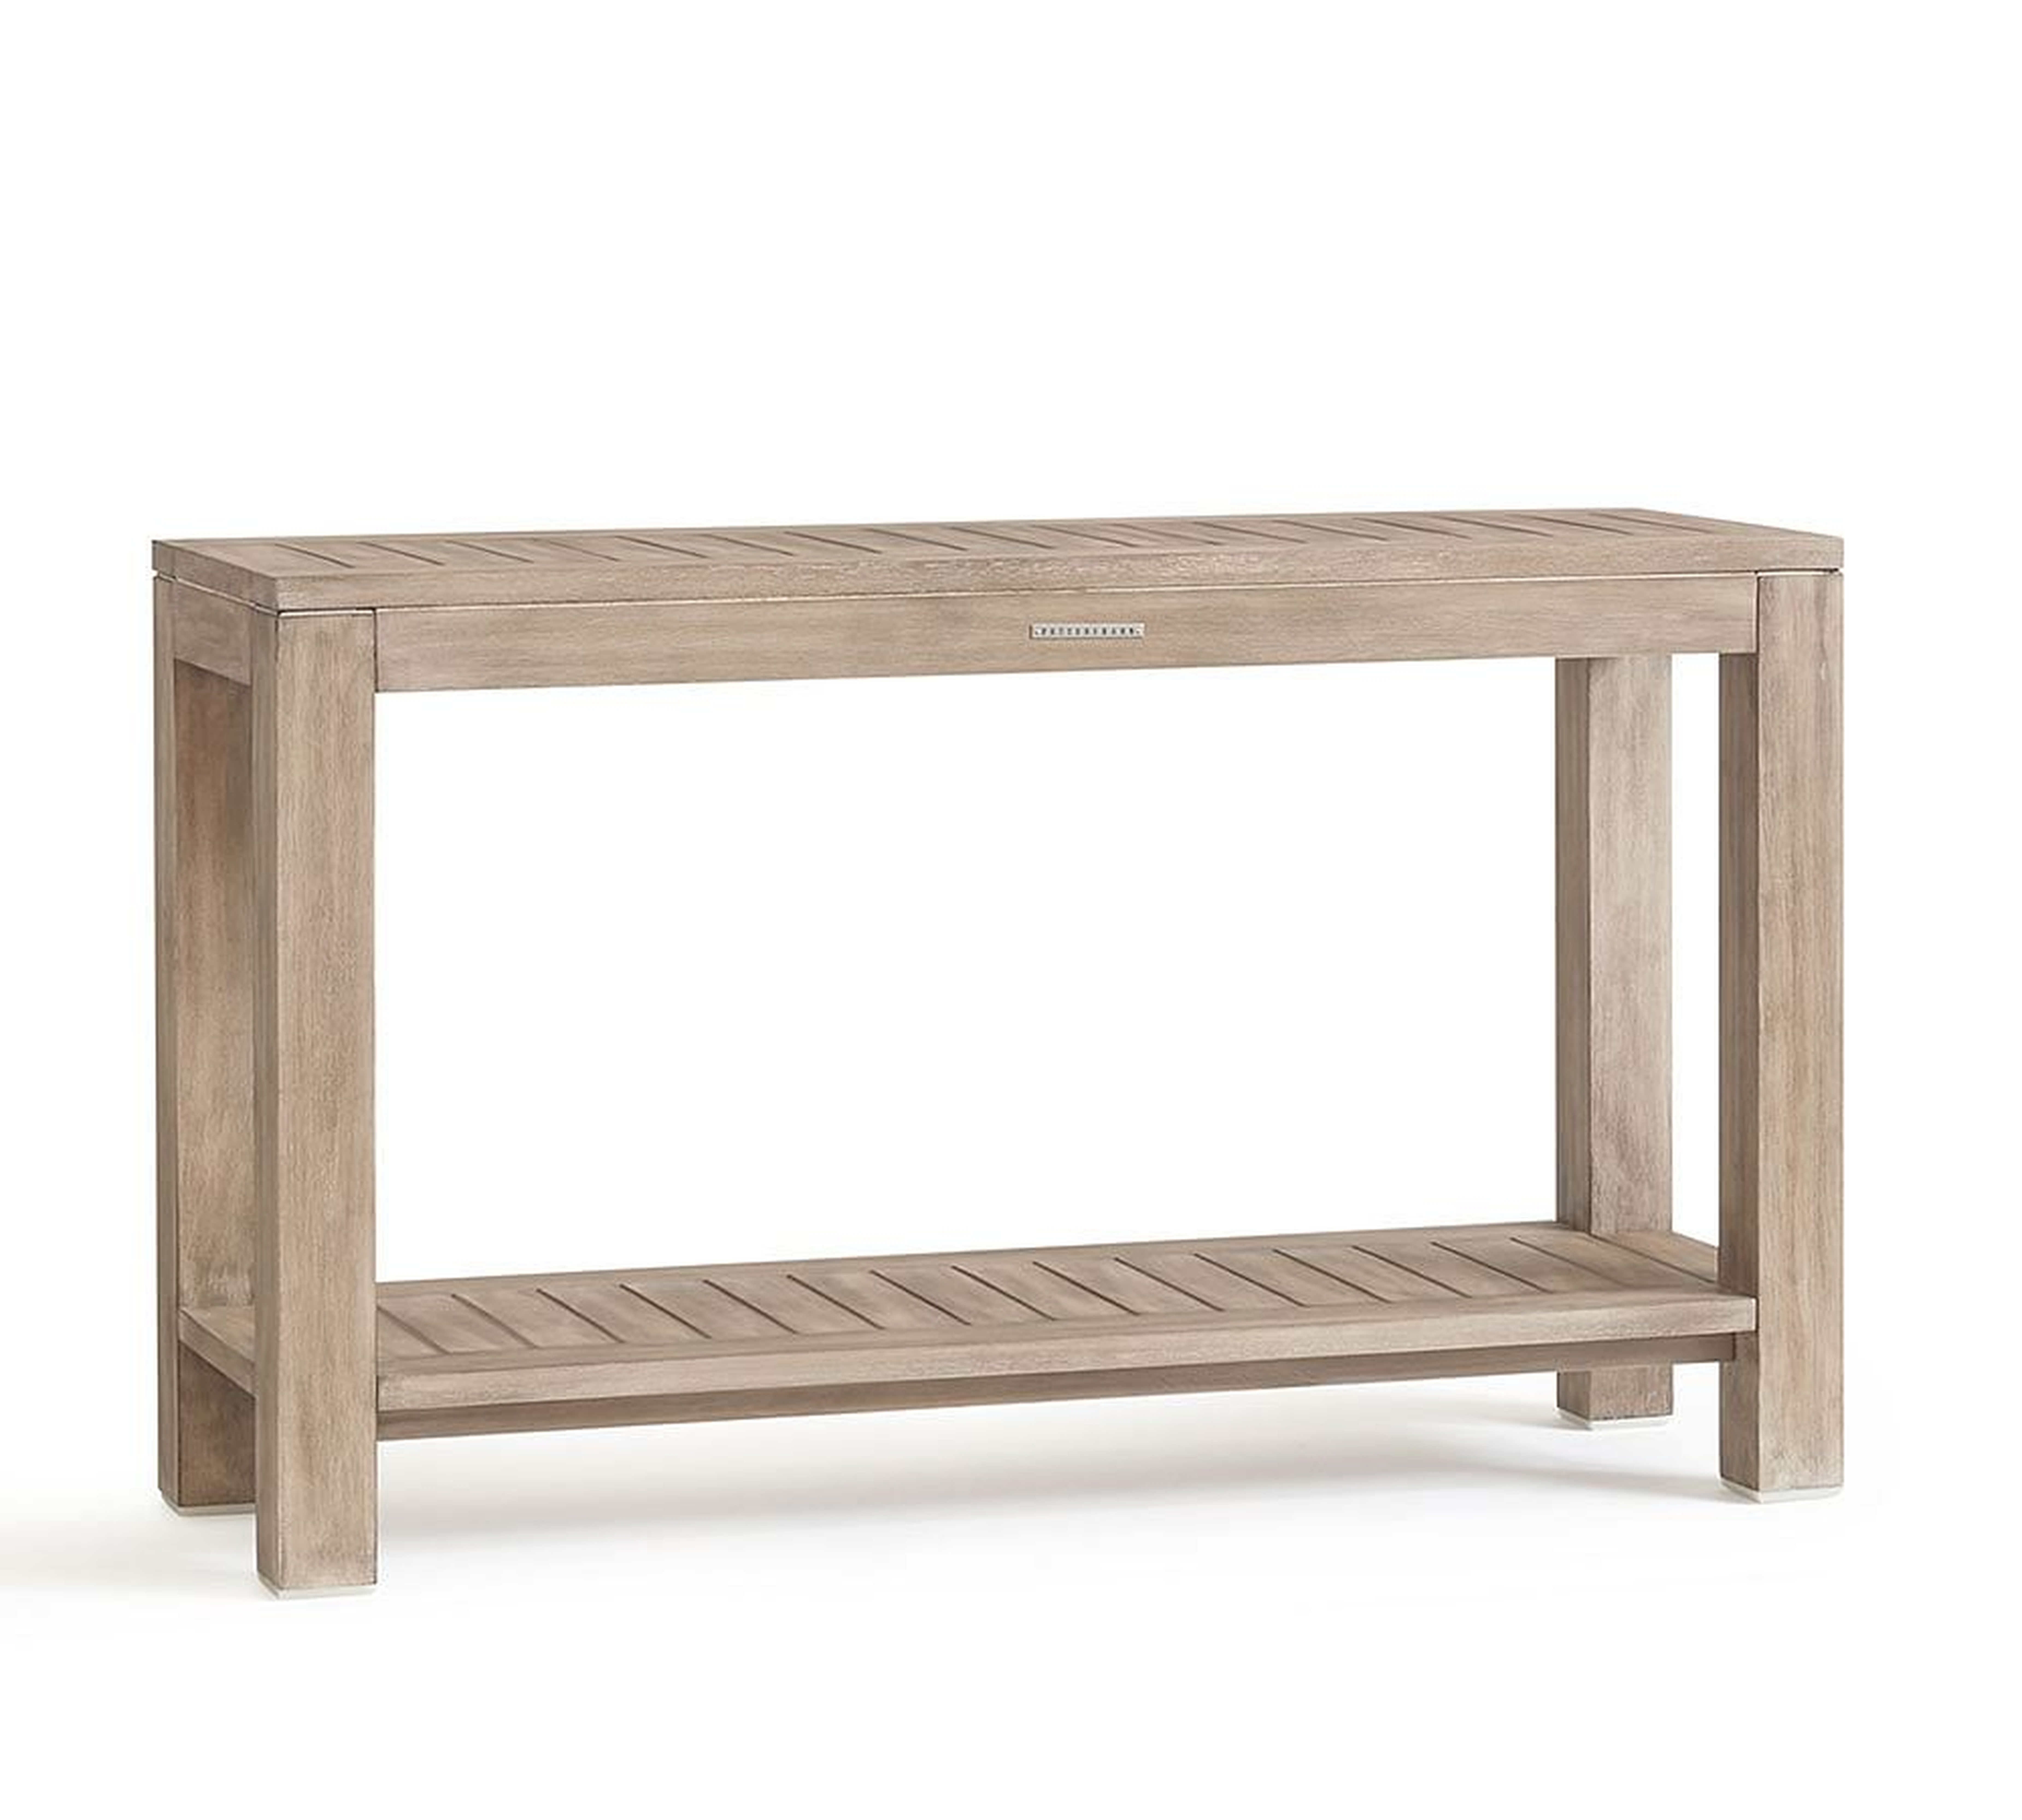 Indio Console Table, Weathered Gray - Pottery Barn